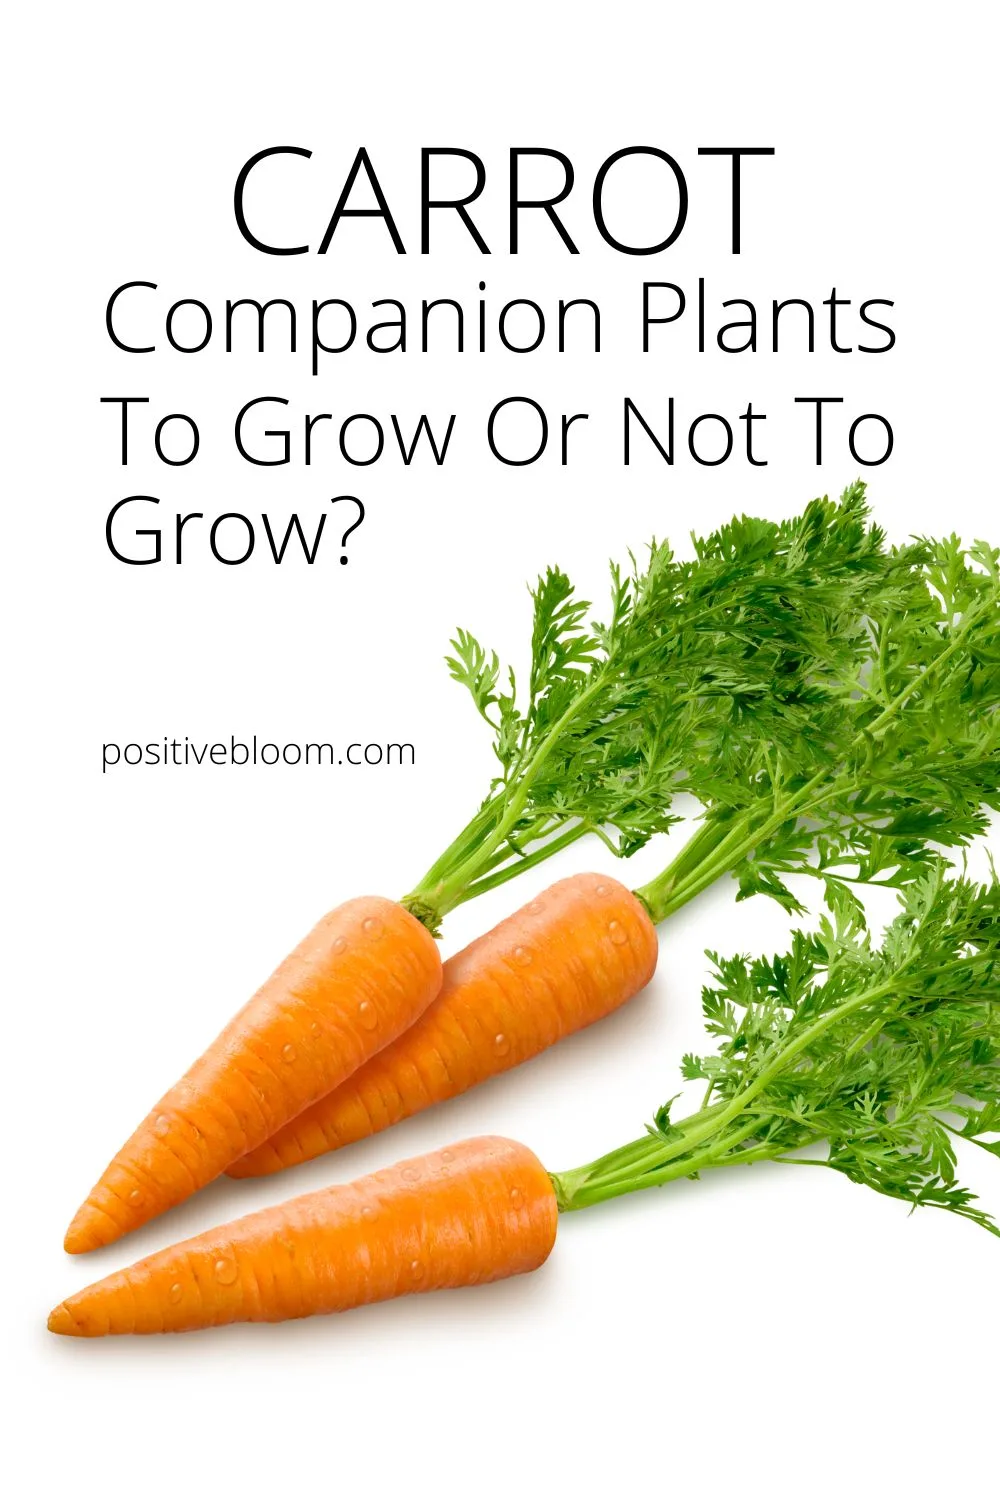 Carrot Companion Plants To Grow Or Not To Grow Pinterest